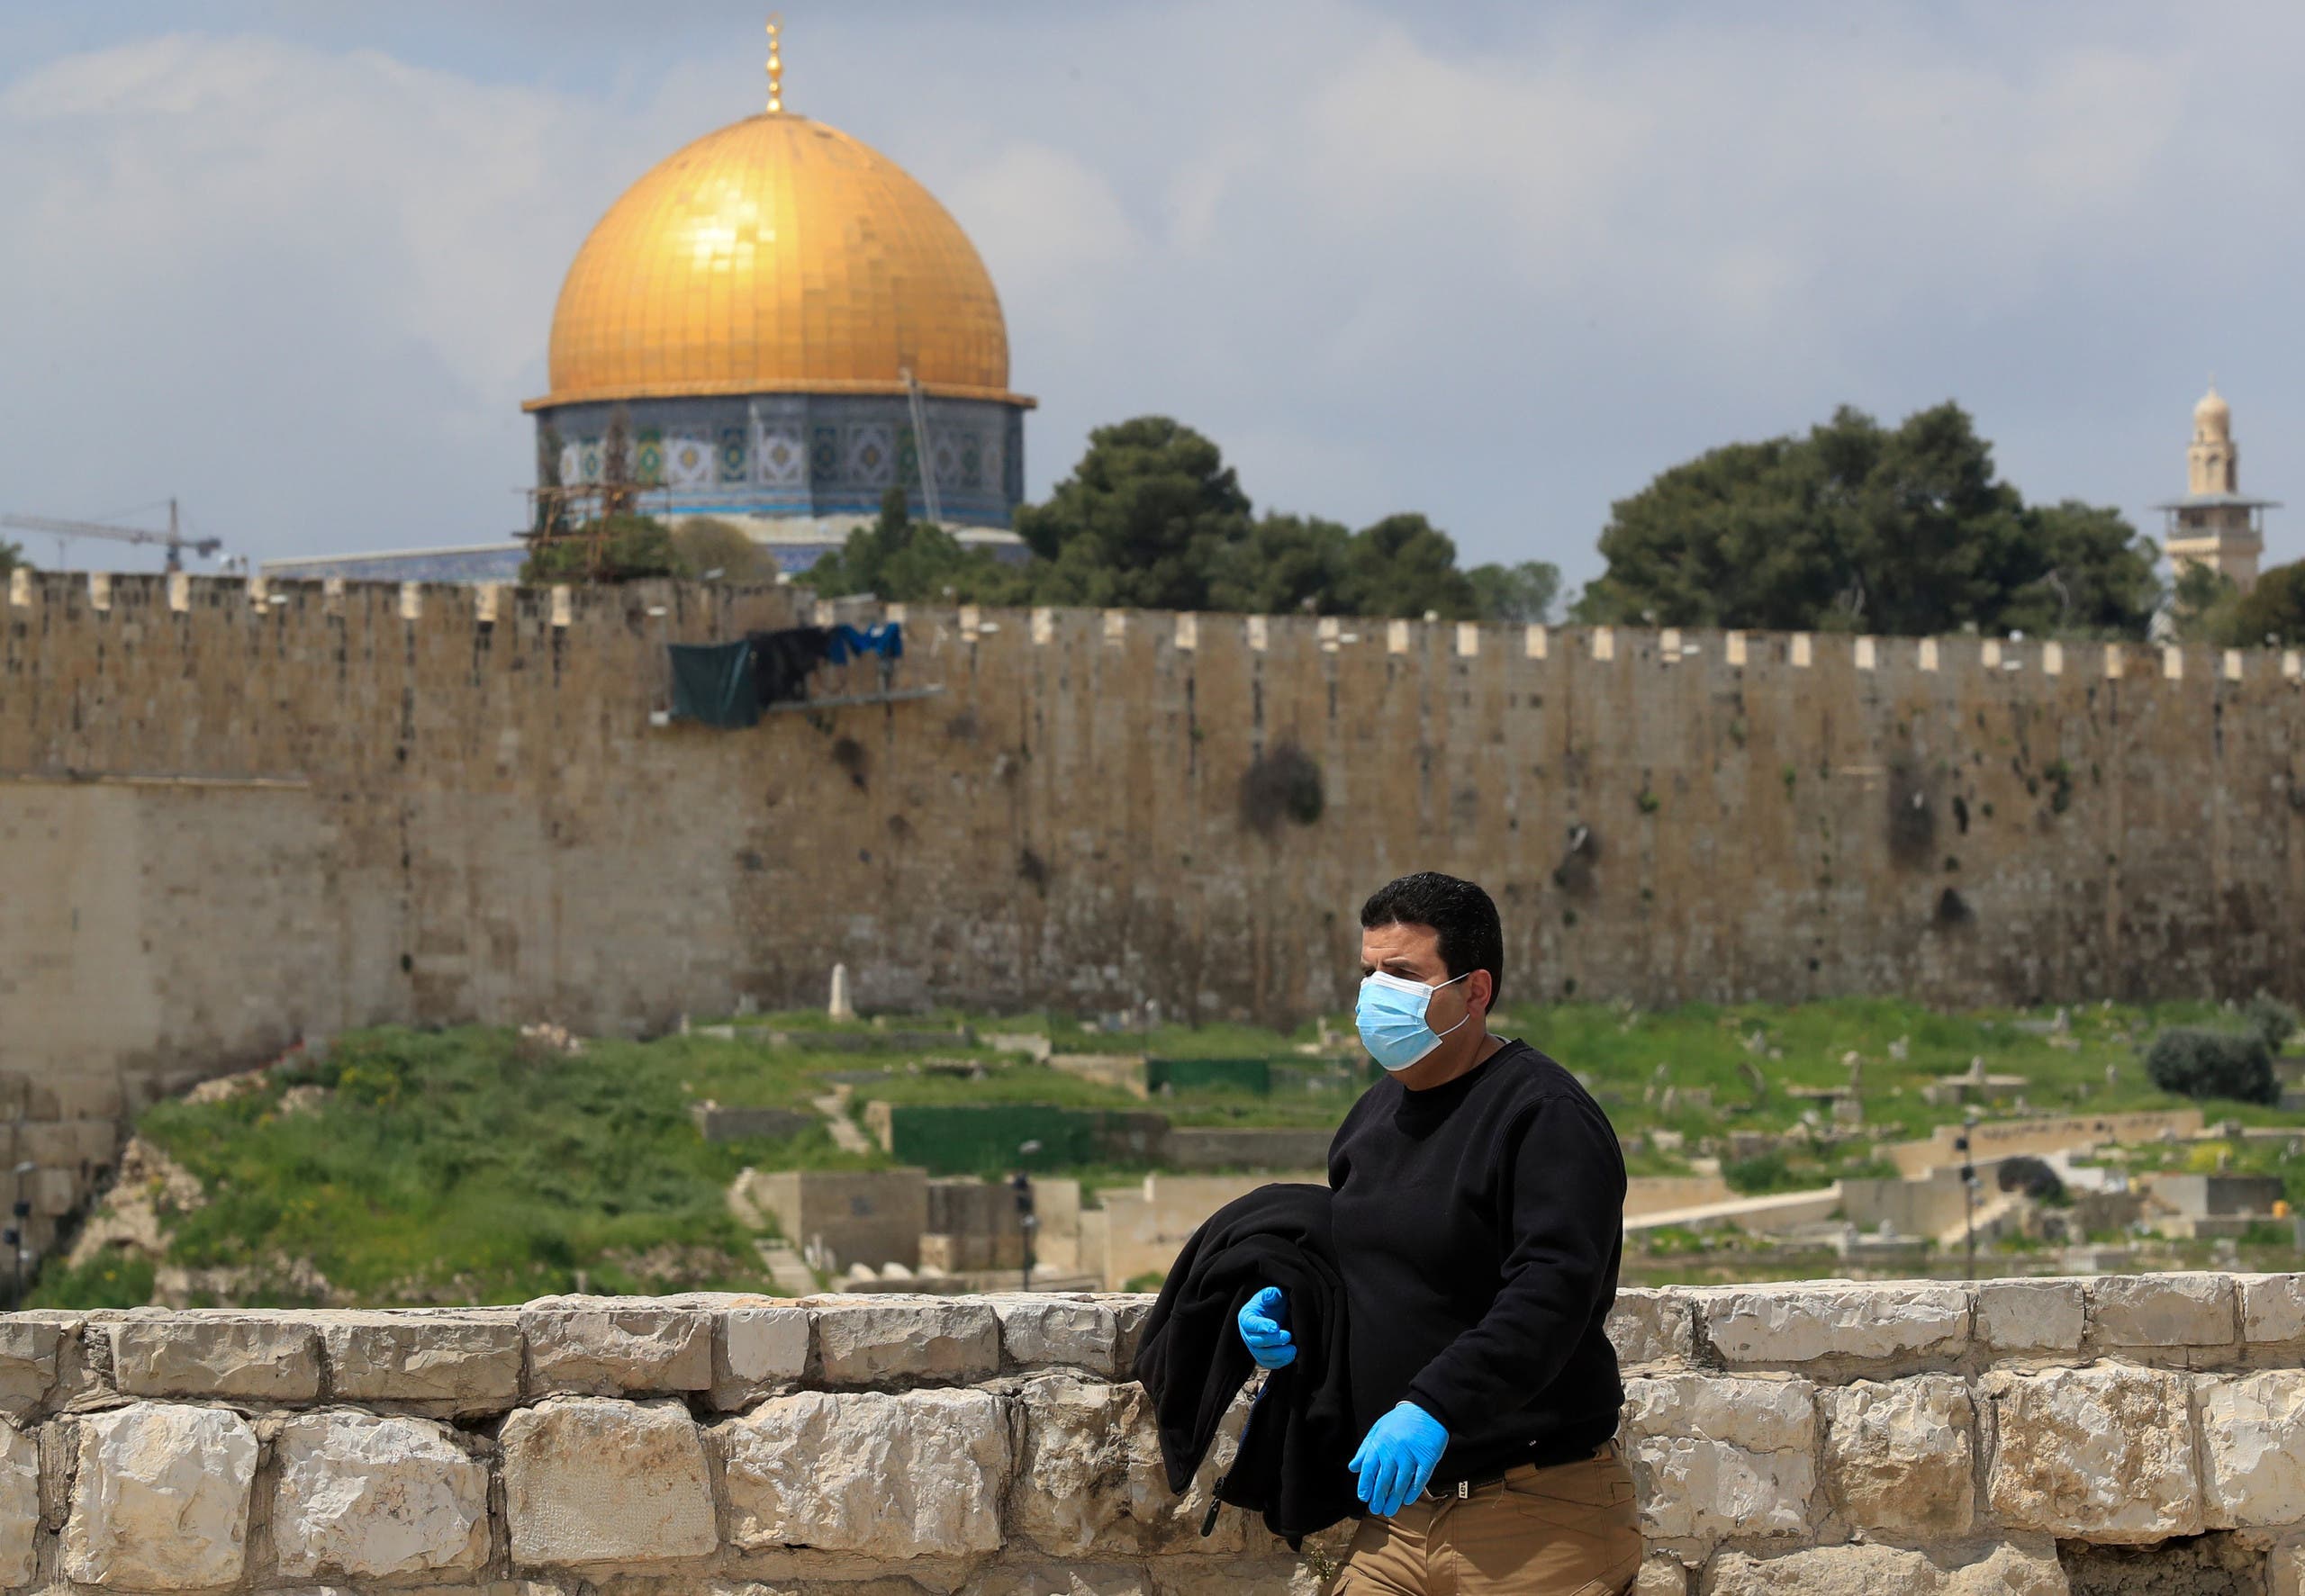 A man wearing a mask and gloves walks past the Dome of the Rock mosqu in Jerusalem's Old City on April 2, 2020. (AFP)